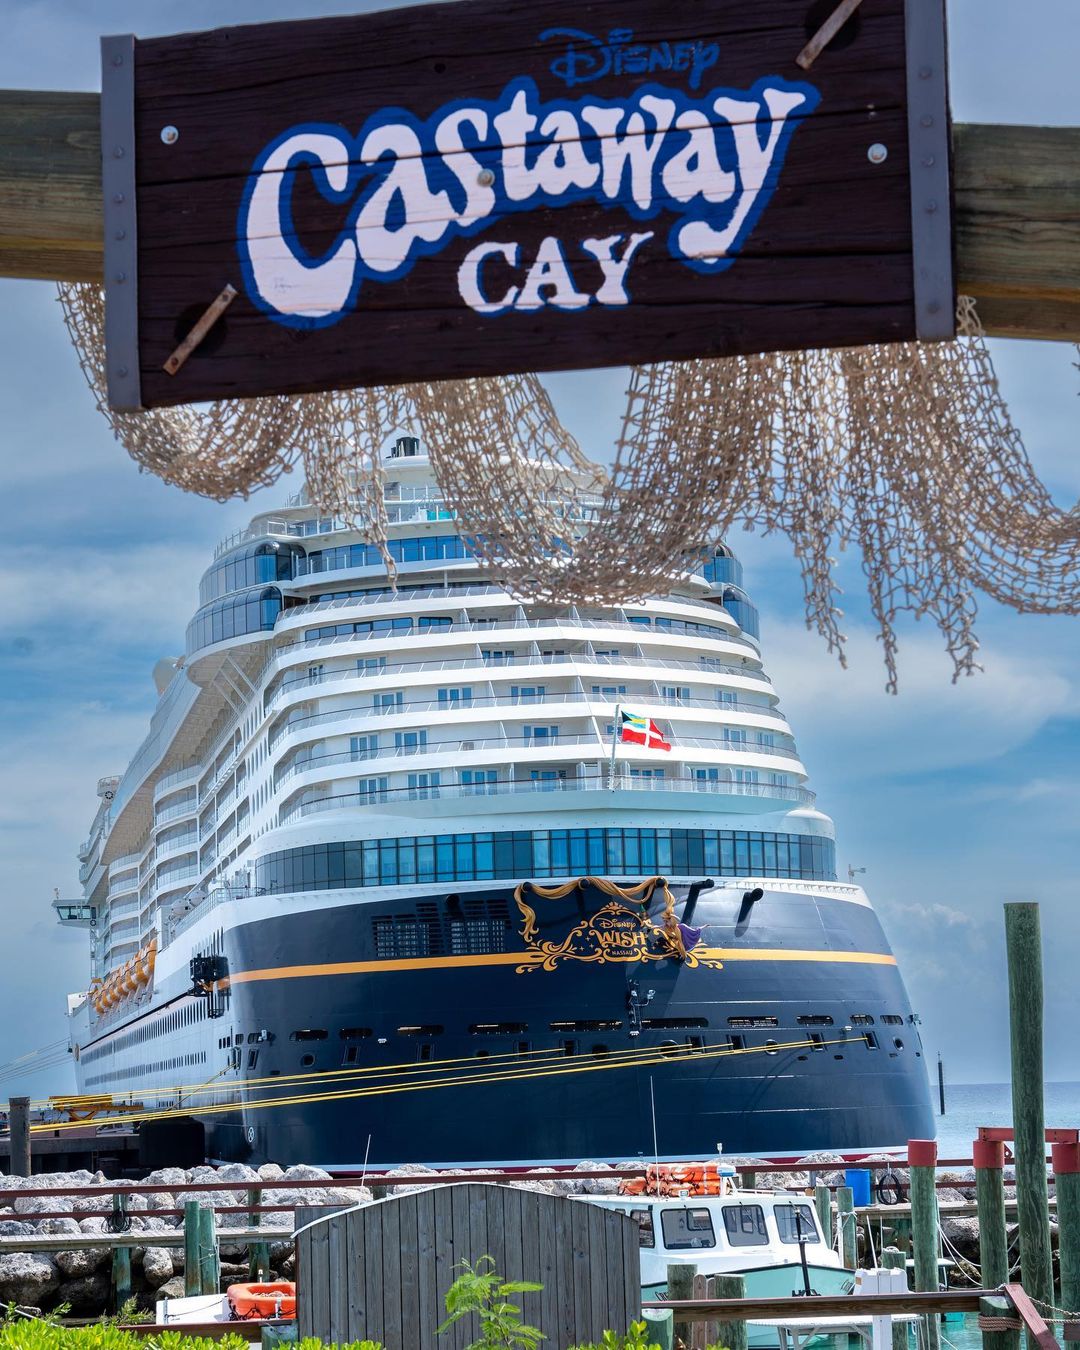 Castaway Cay - Private Island and Disney Cruise Destination